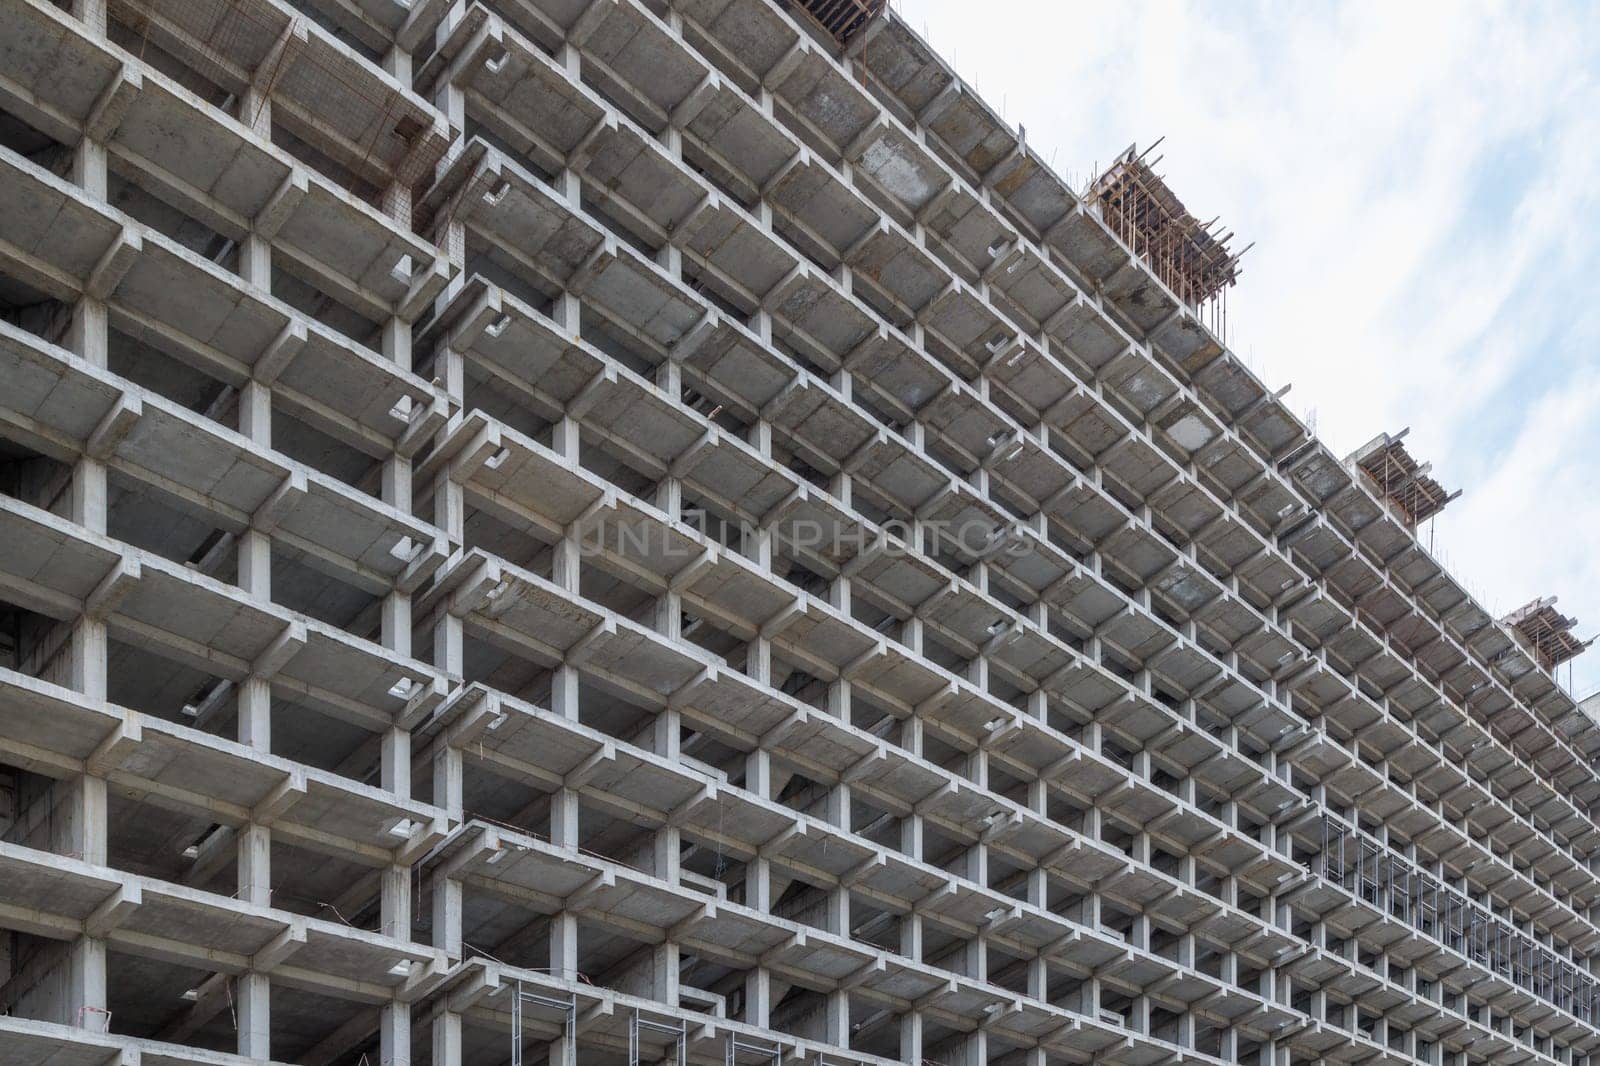 A large multi-storey apartment building is under construction, with a grey facade and a pattern of holes. The engineering fixtures are visible against the cloudy sky